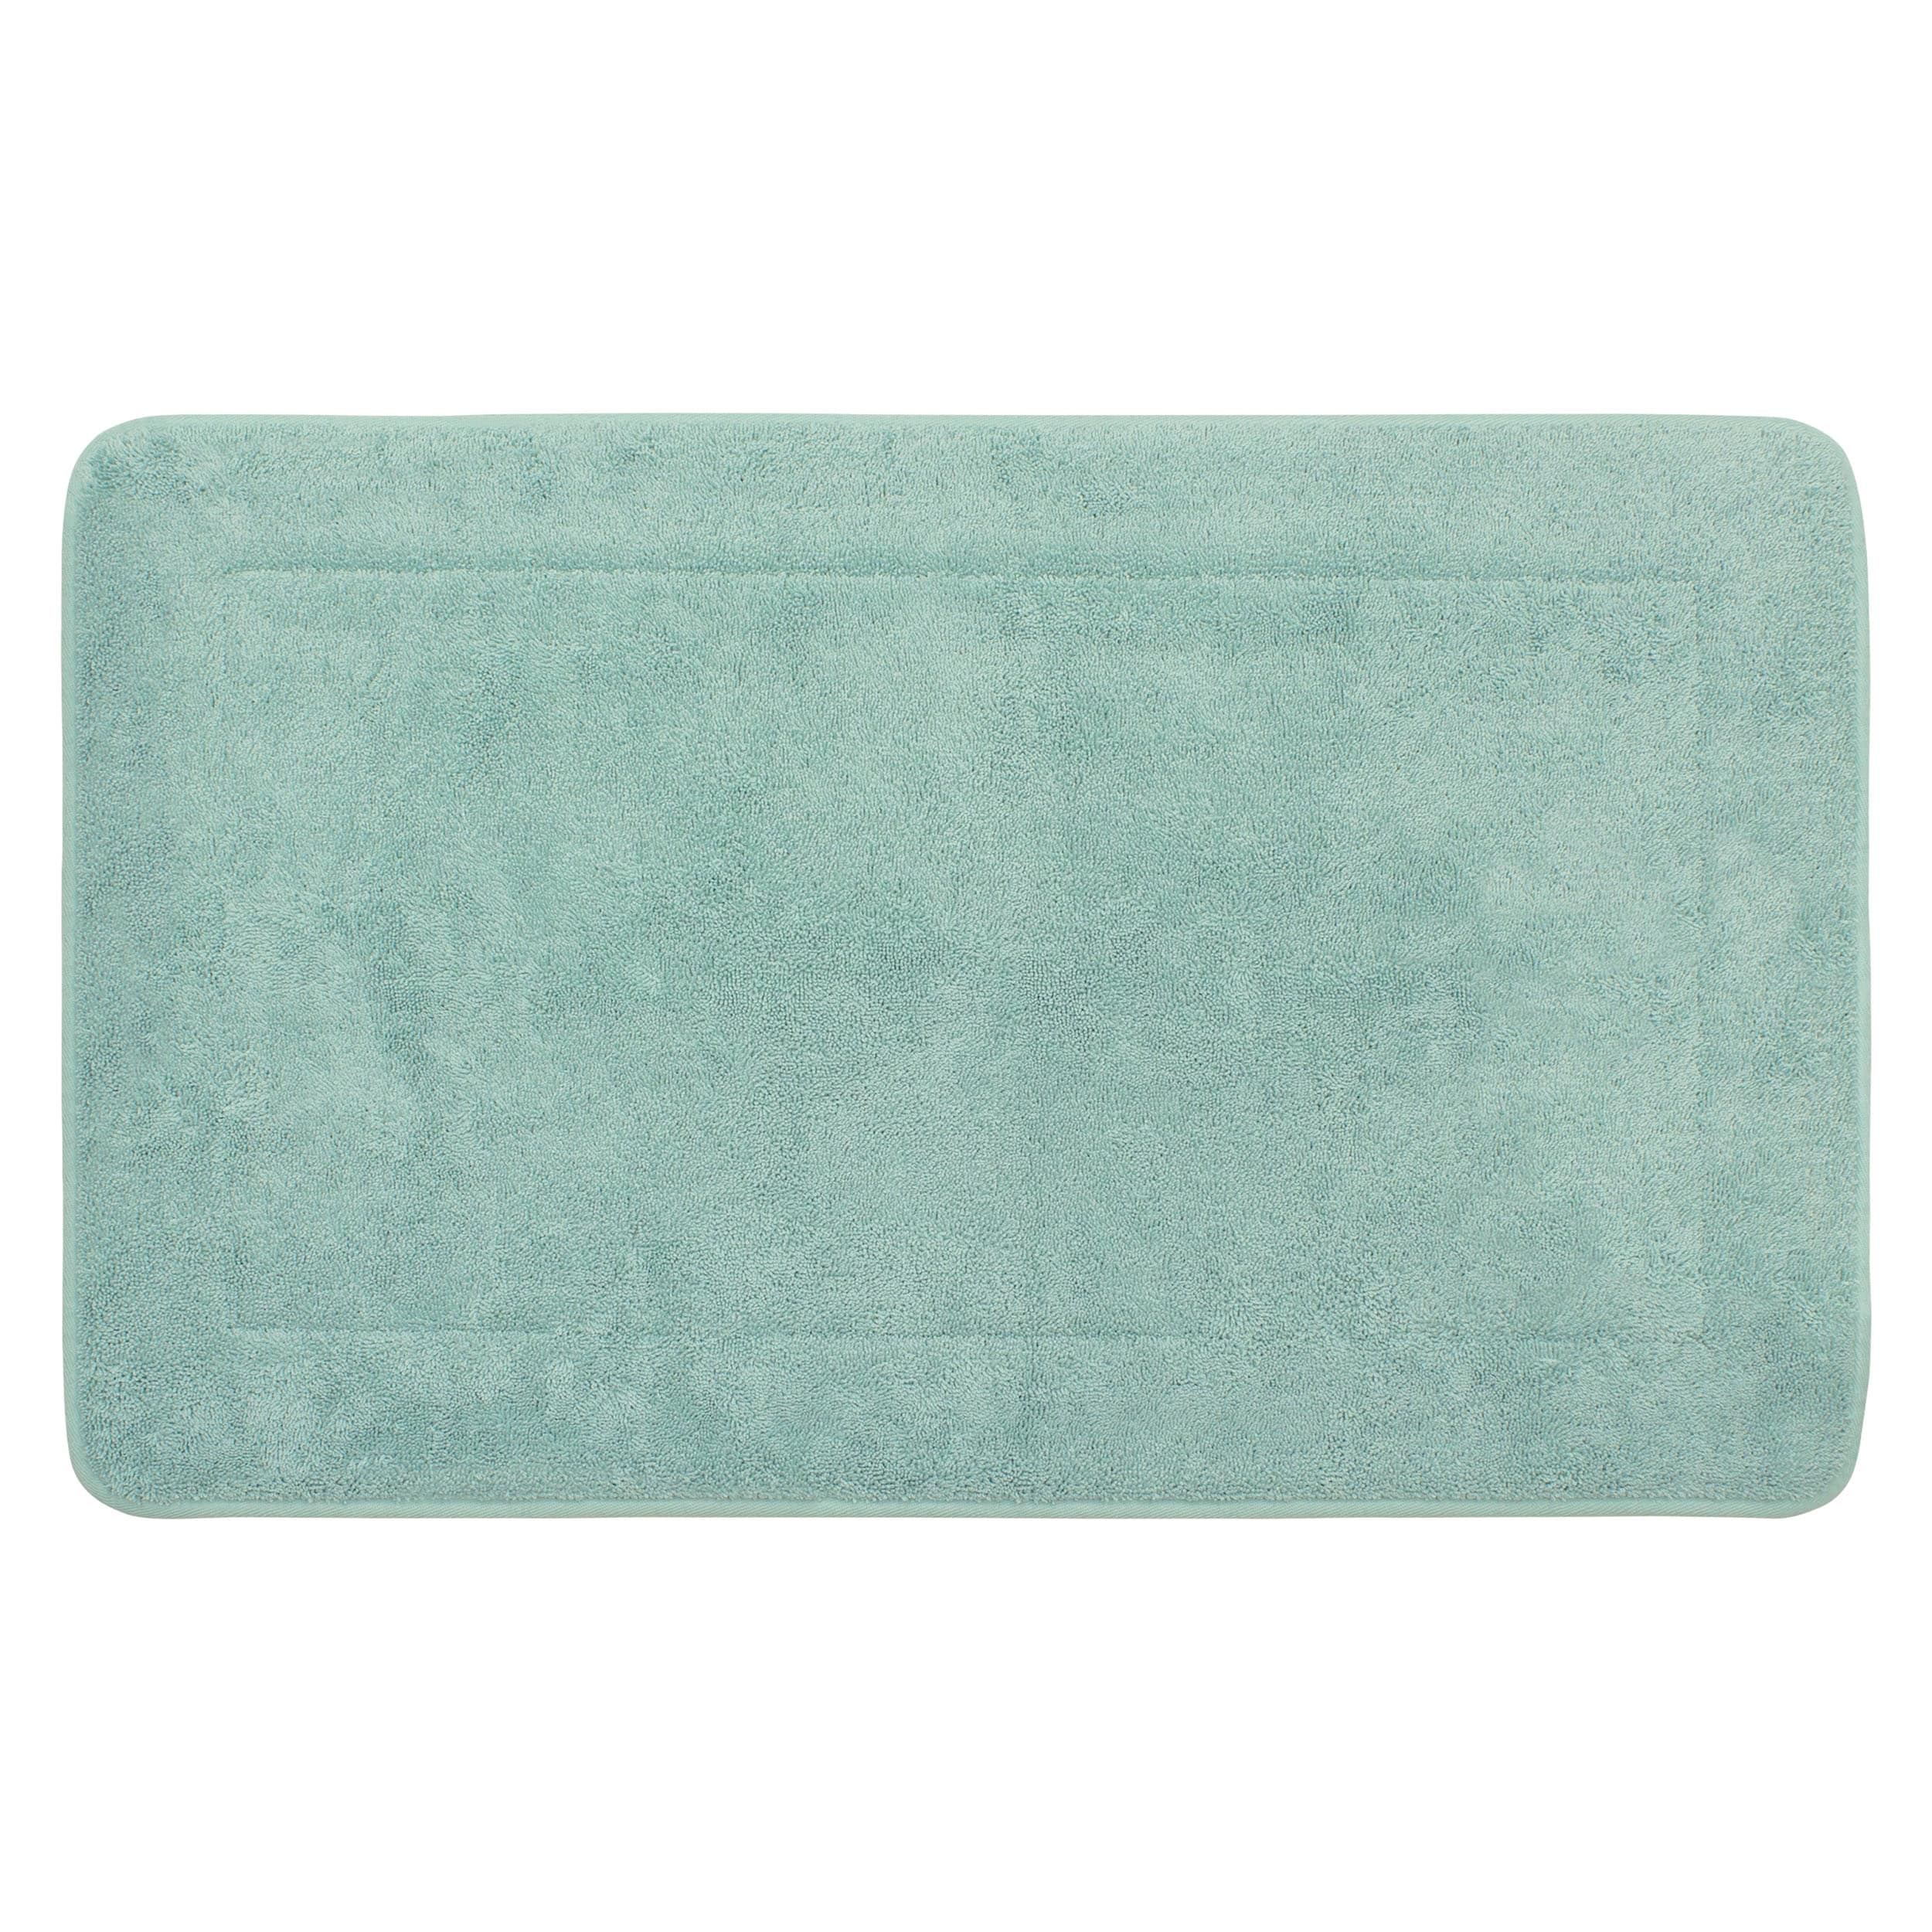 Oliver Brown Terry Memory Foam Bath Mat - On Sale - Bed Bath